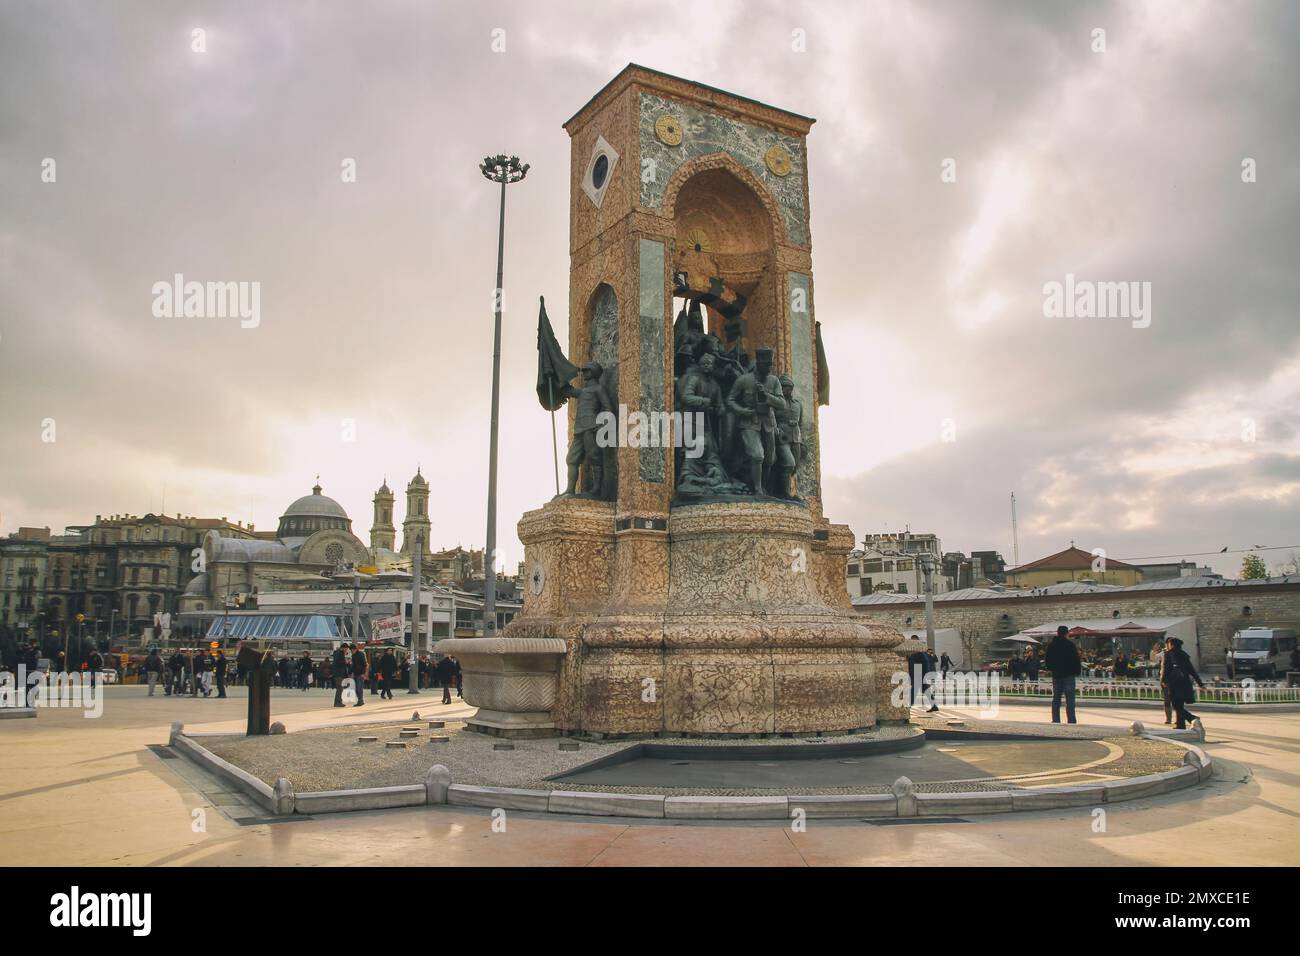 The Republic Monument at the centre of Taksim Square, a major tourist and leisure district famed for its restaurants, shops, and hotels, Istanbul, TR Stock Photo